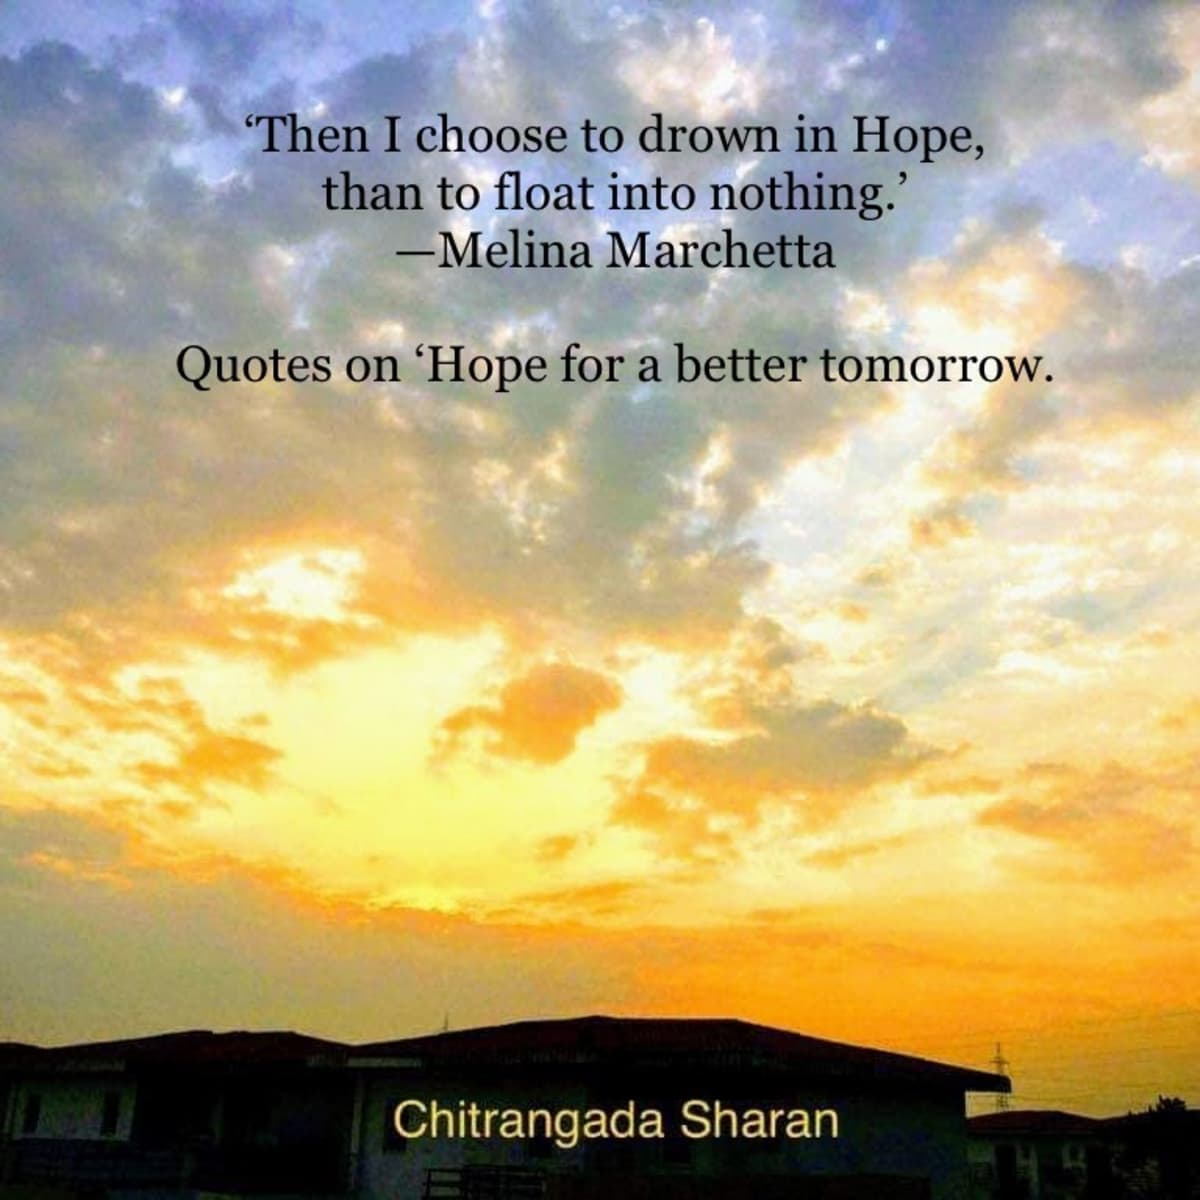 21 Quotes On, Hope For A Better Tomorrow - Letterpile